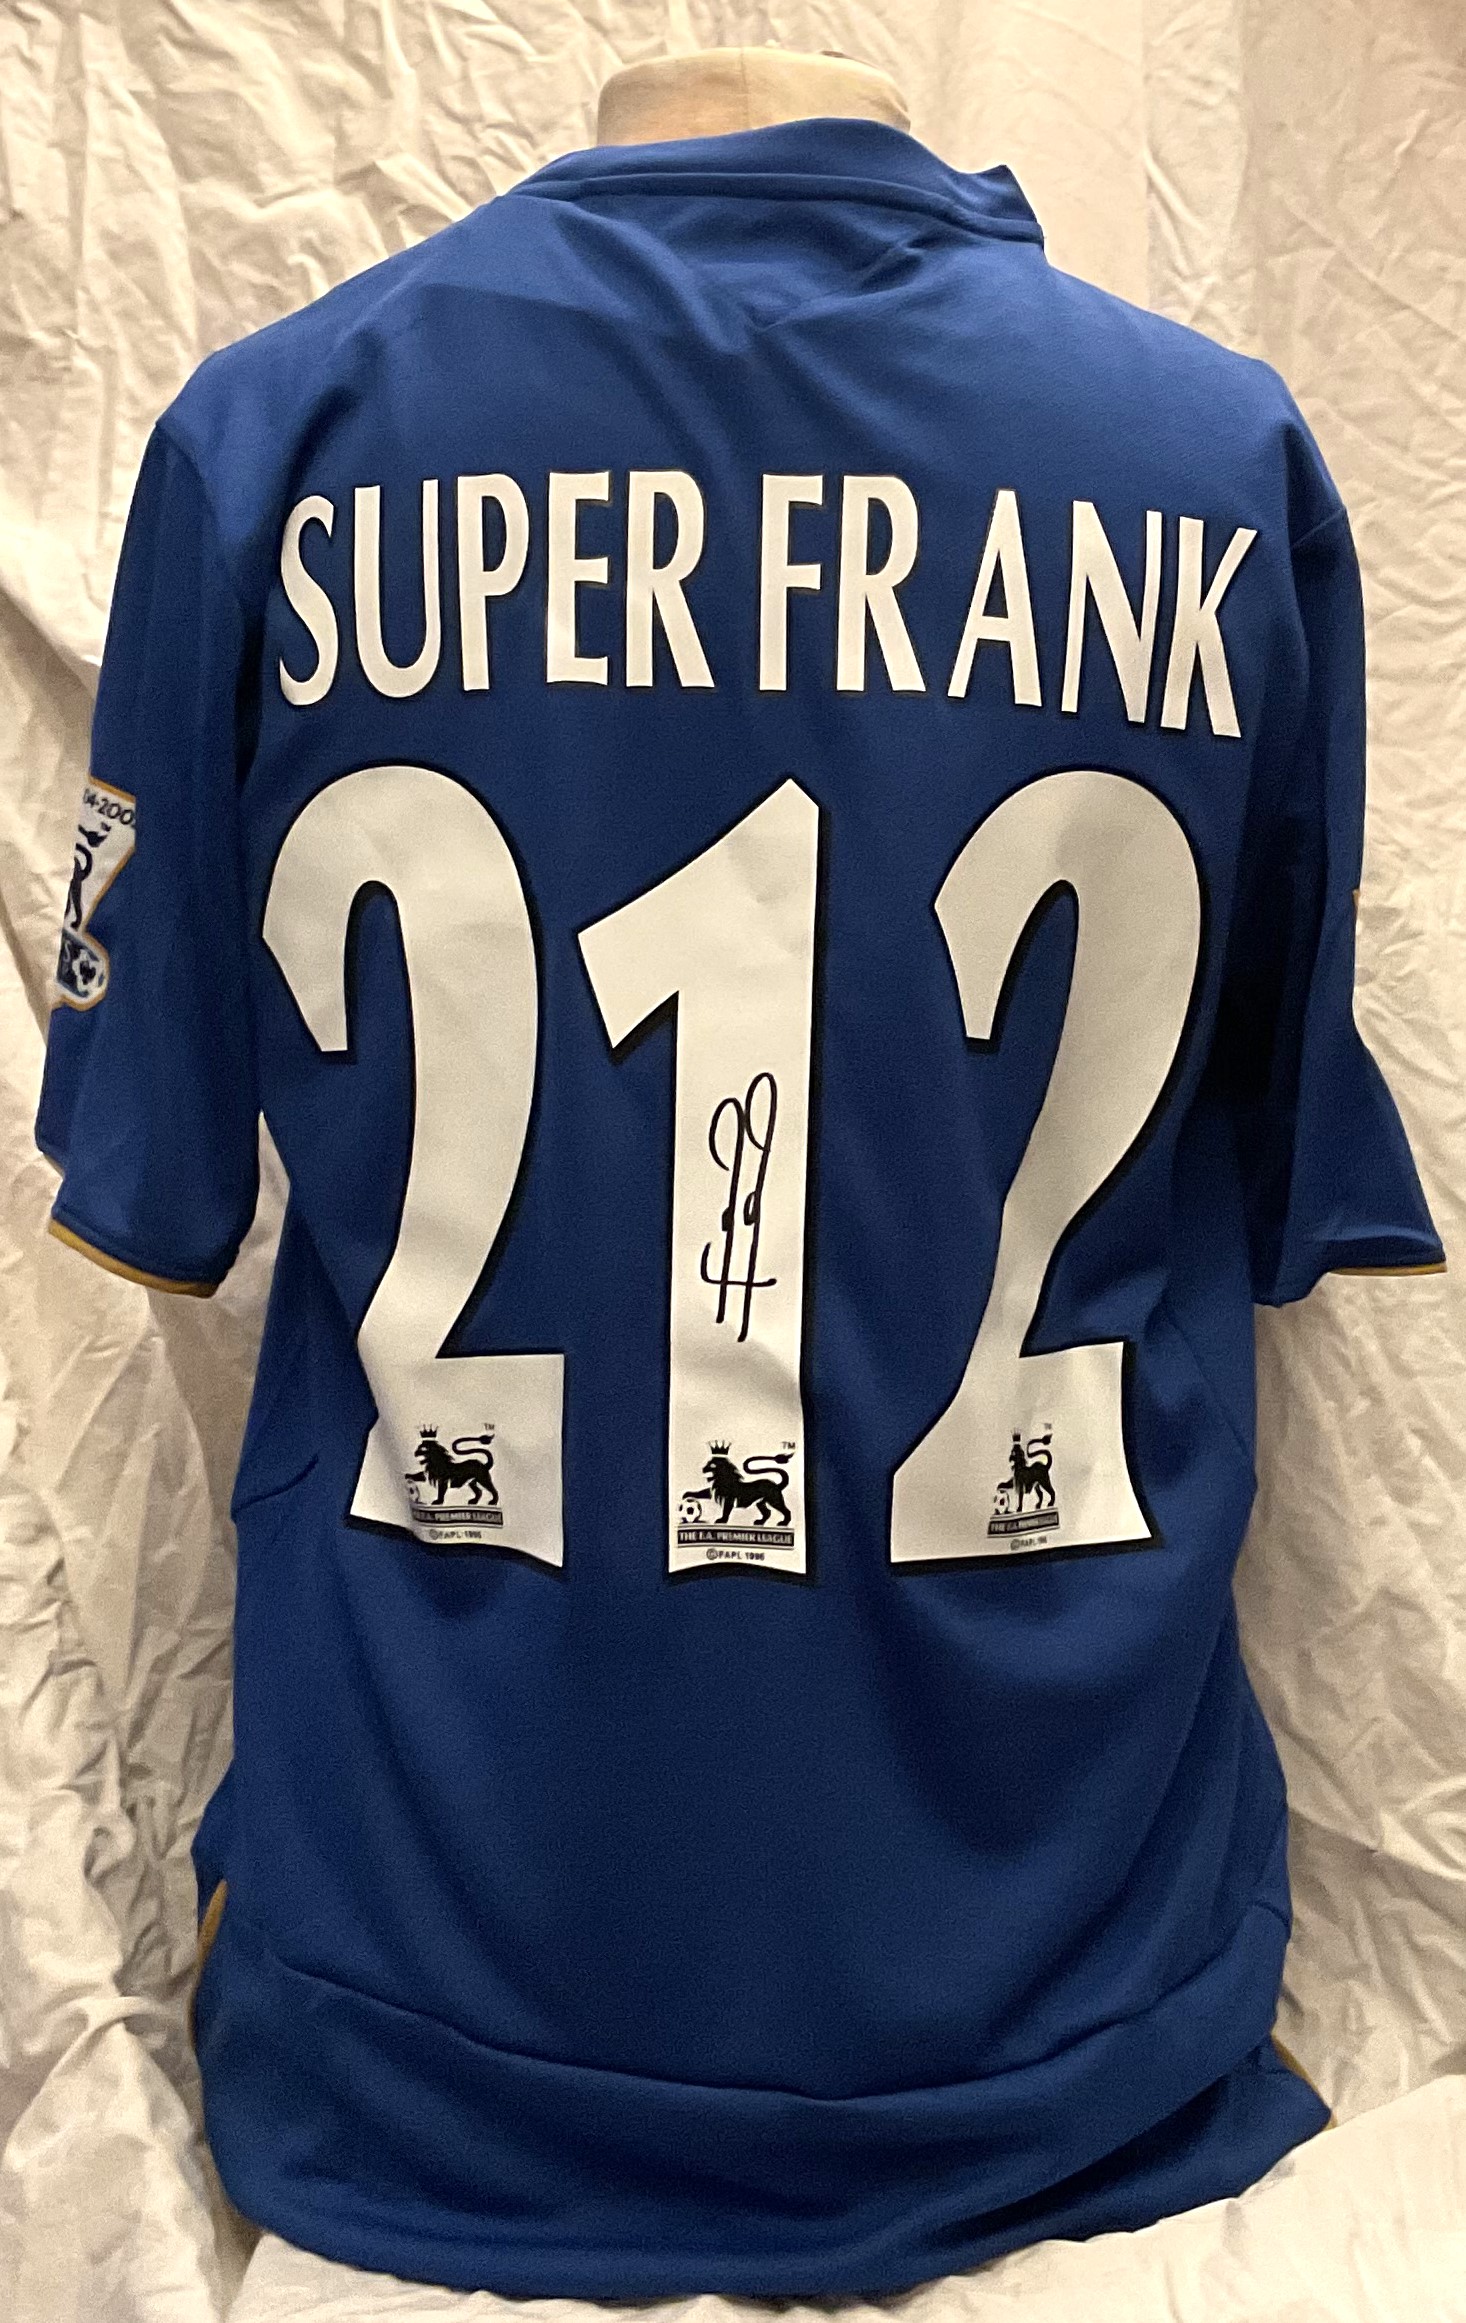 Football Frank Lampard signed Chelsea replica home football shirt size medium. Good Condition. All